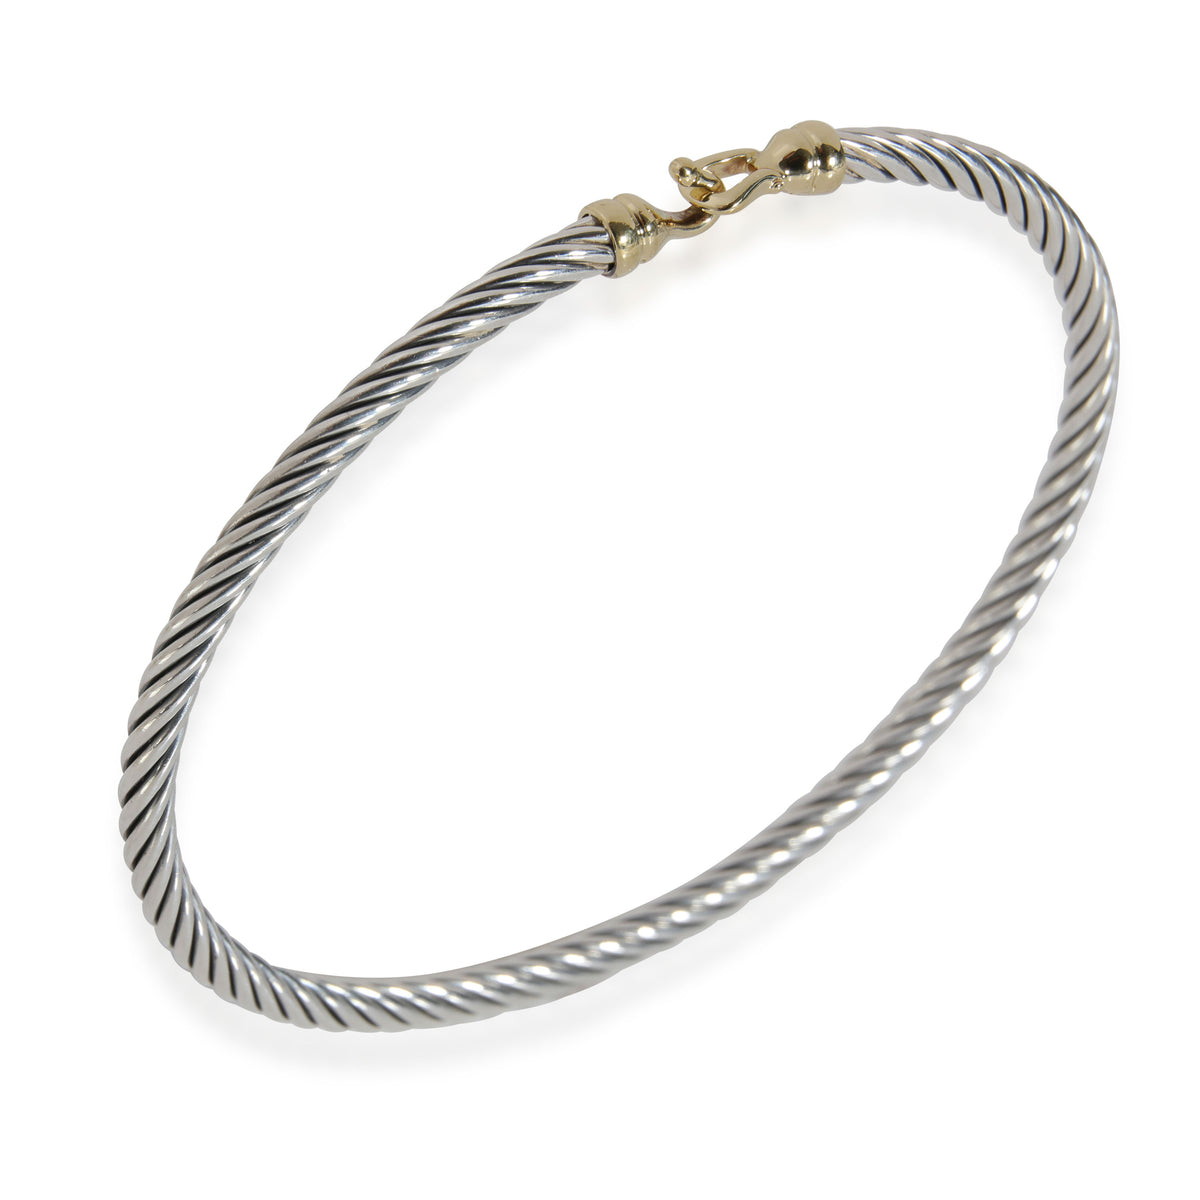 David Yurman 3mm Cable Buckle Bangle in 18k Sterling/Gold